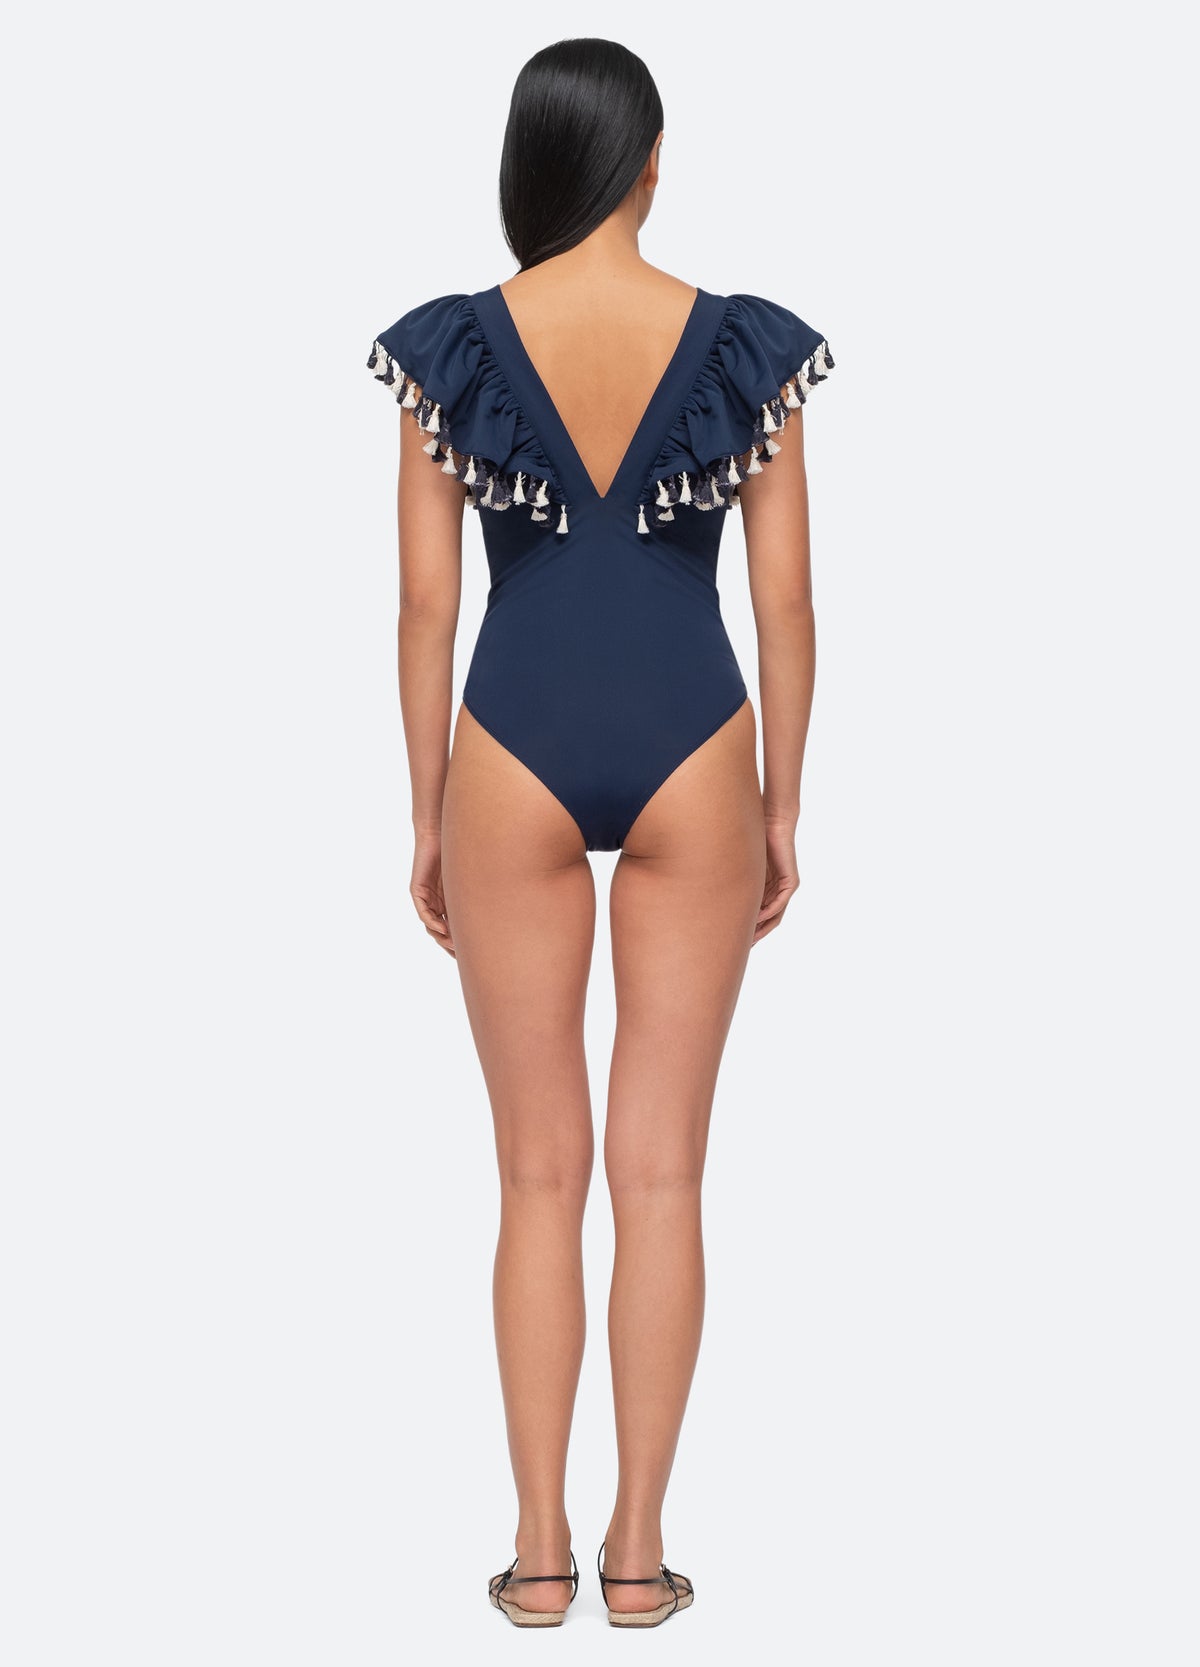 navy-nautical one piece-back view - 3